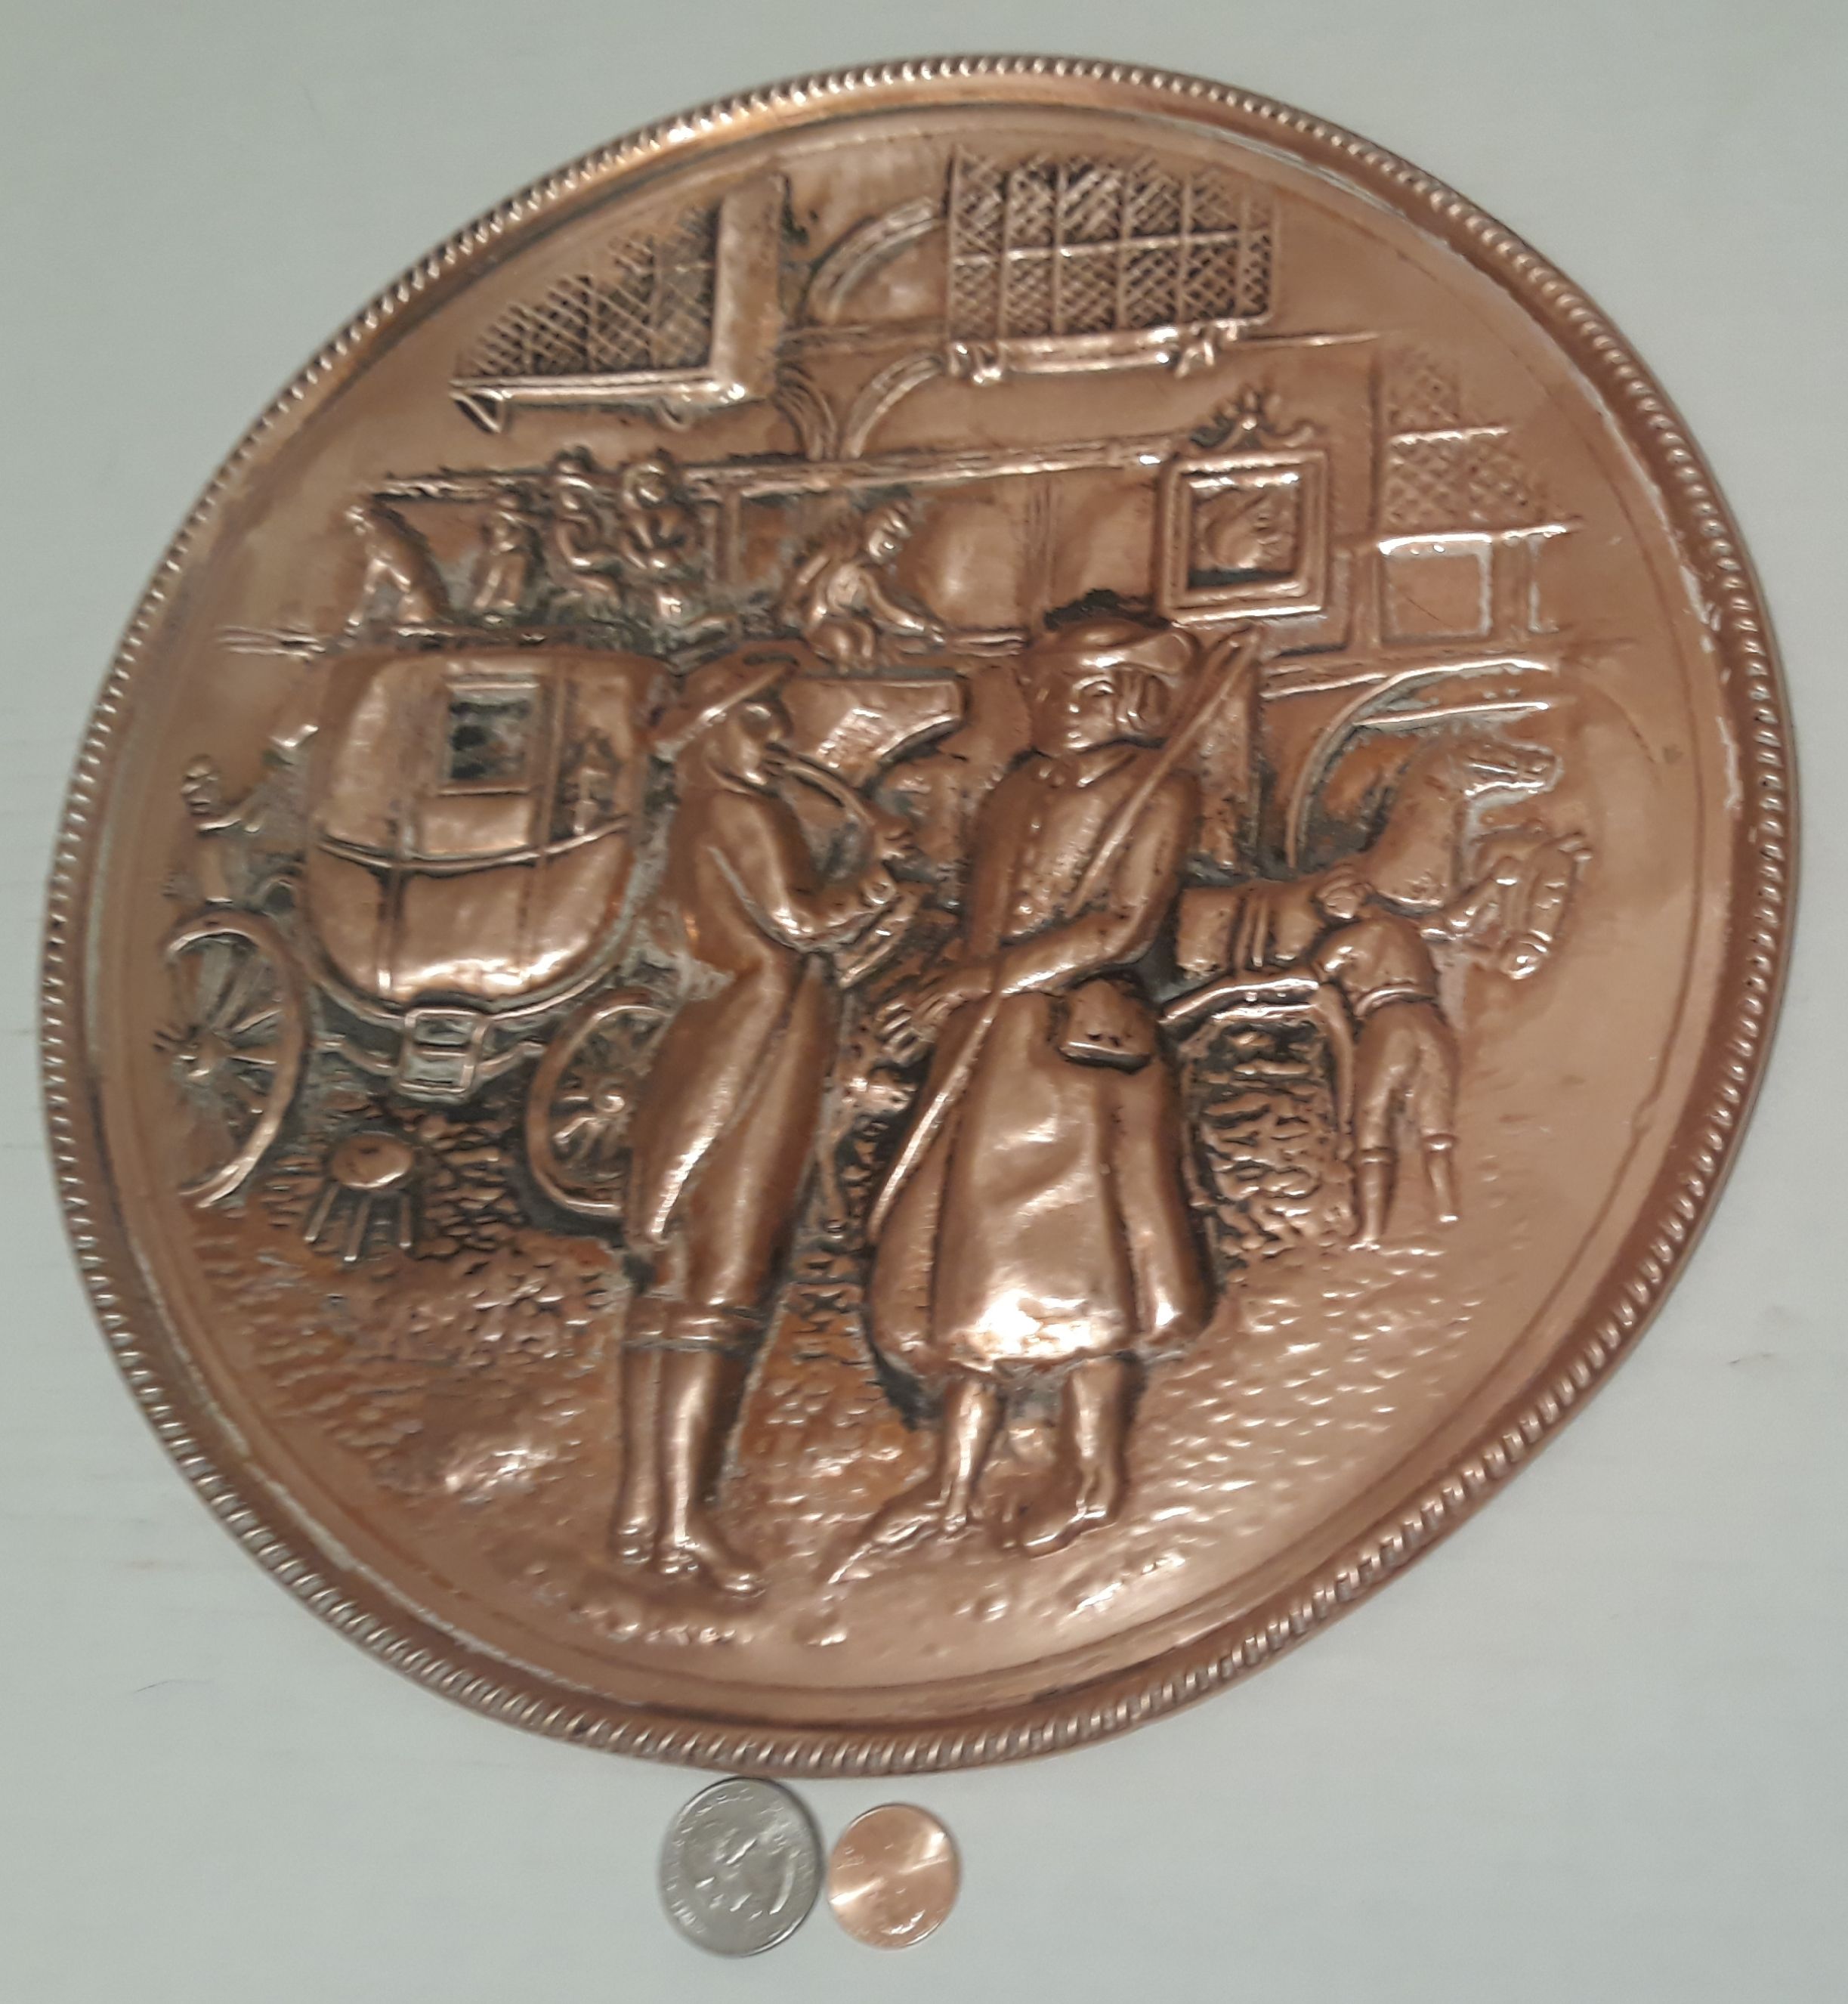 Vintage Metal Copper Wall Hanging Plate, 11" Wide, Horse Drawn Carriage, Home Decor, Wall Hanging Display, Shelf Display, This Can Be Shined Up Even